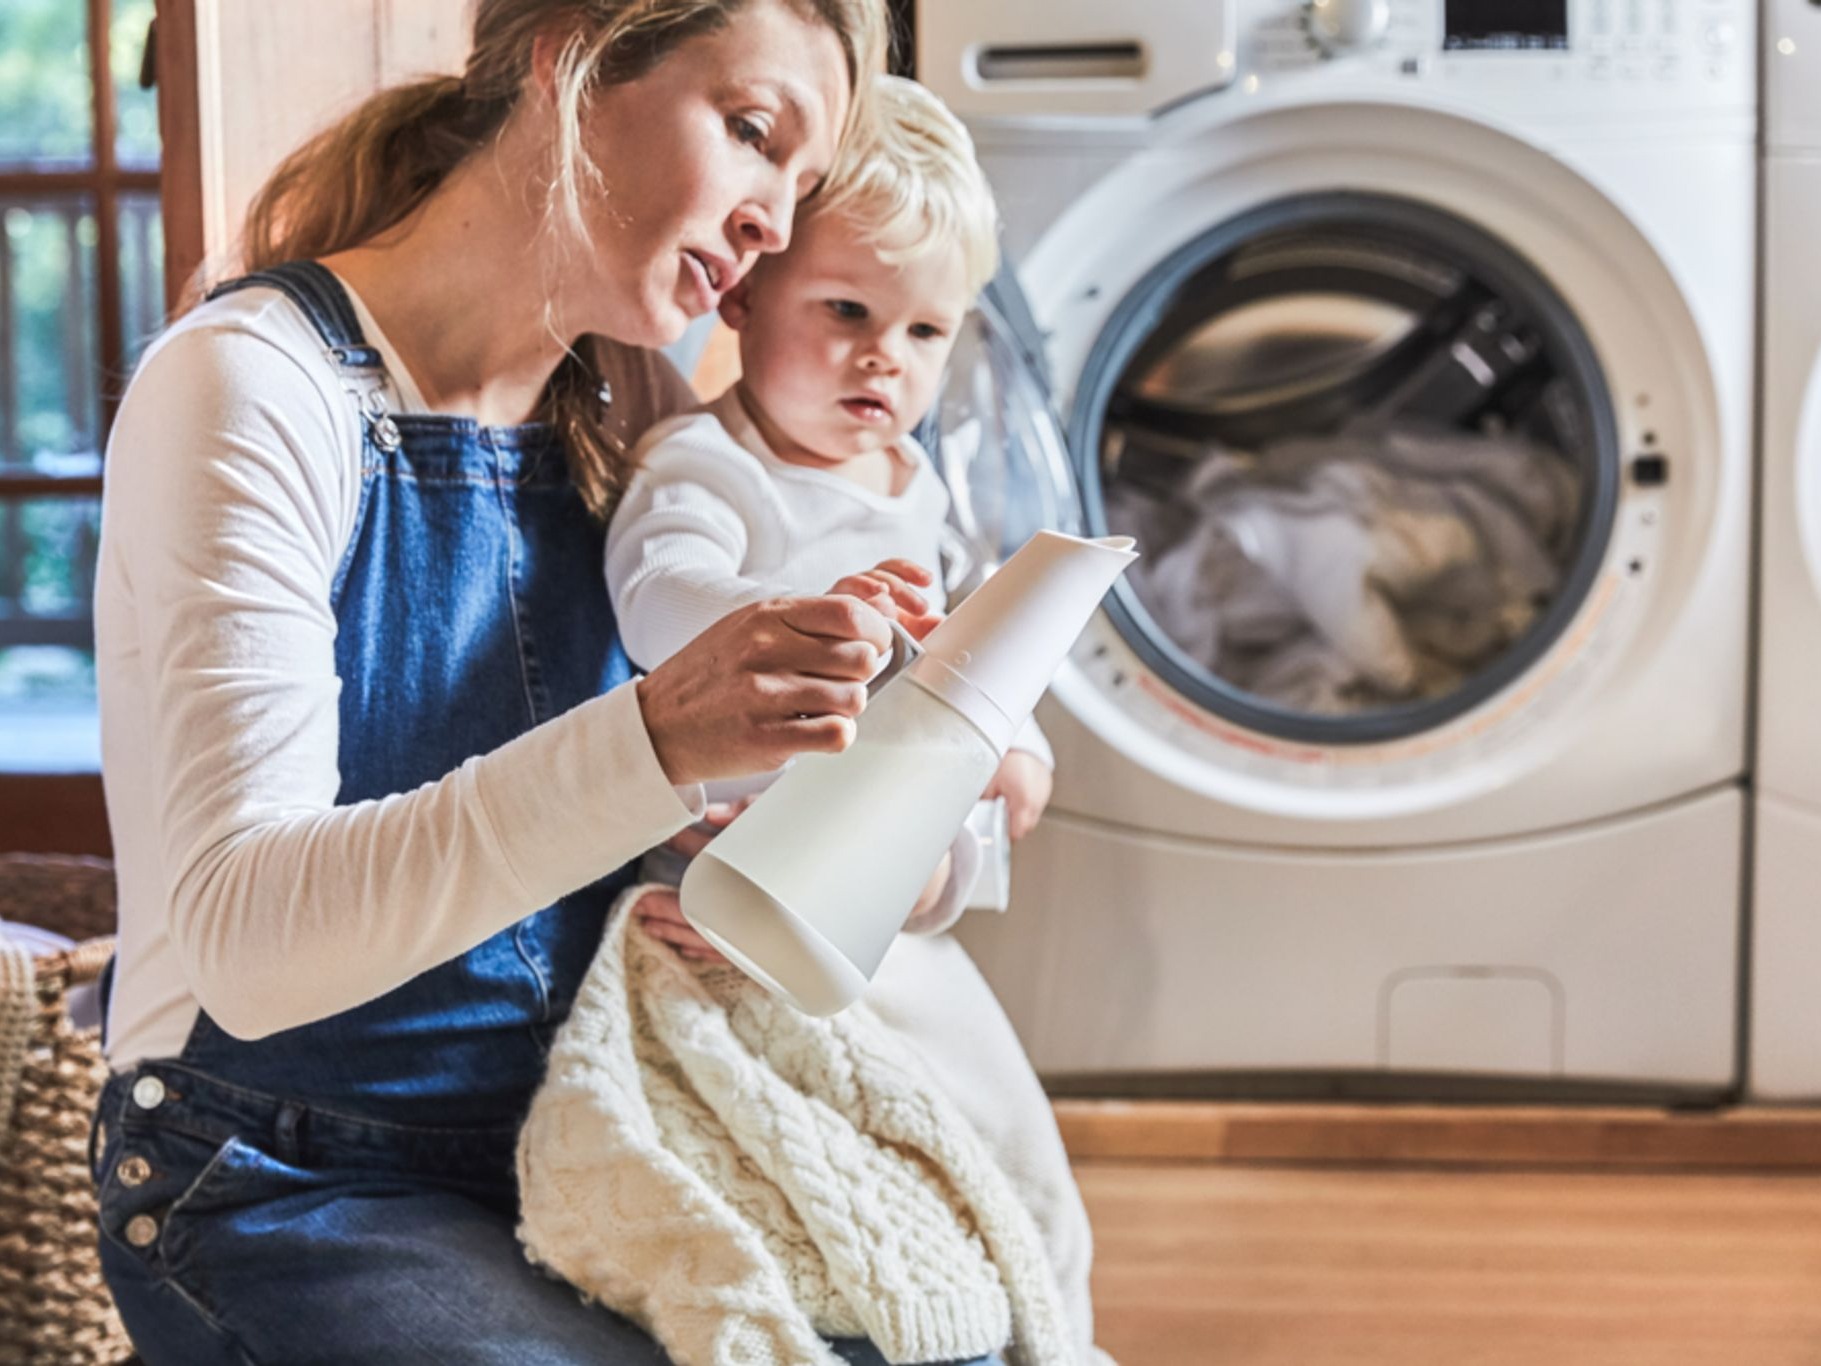 Woman and child holding laundry detergent dispenser in front of washer and dryer